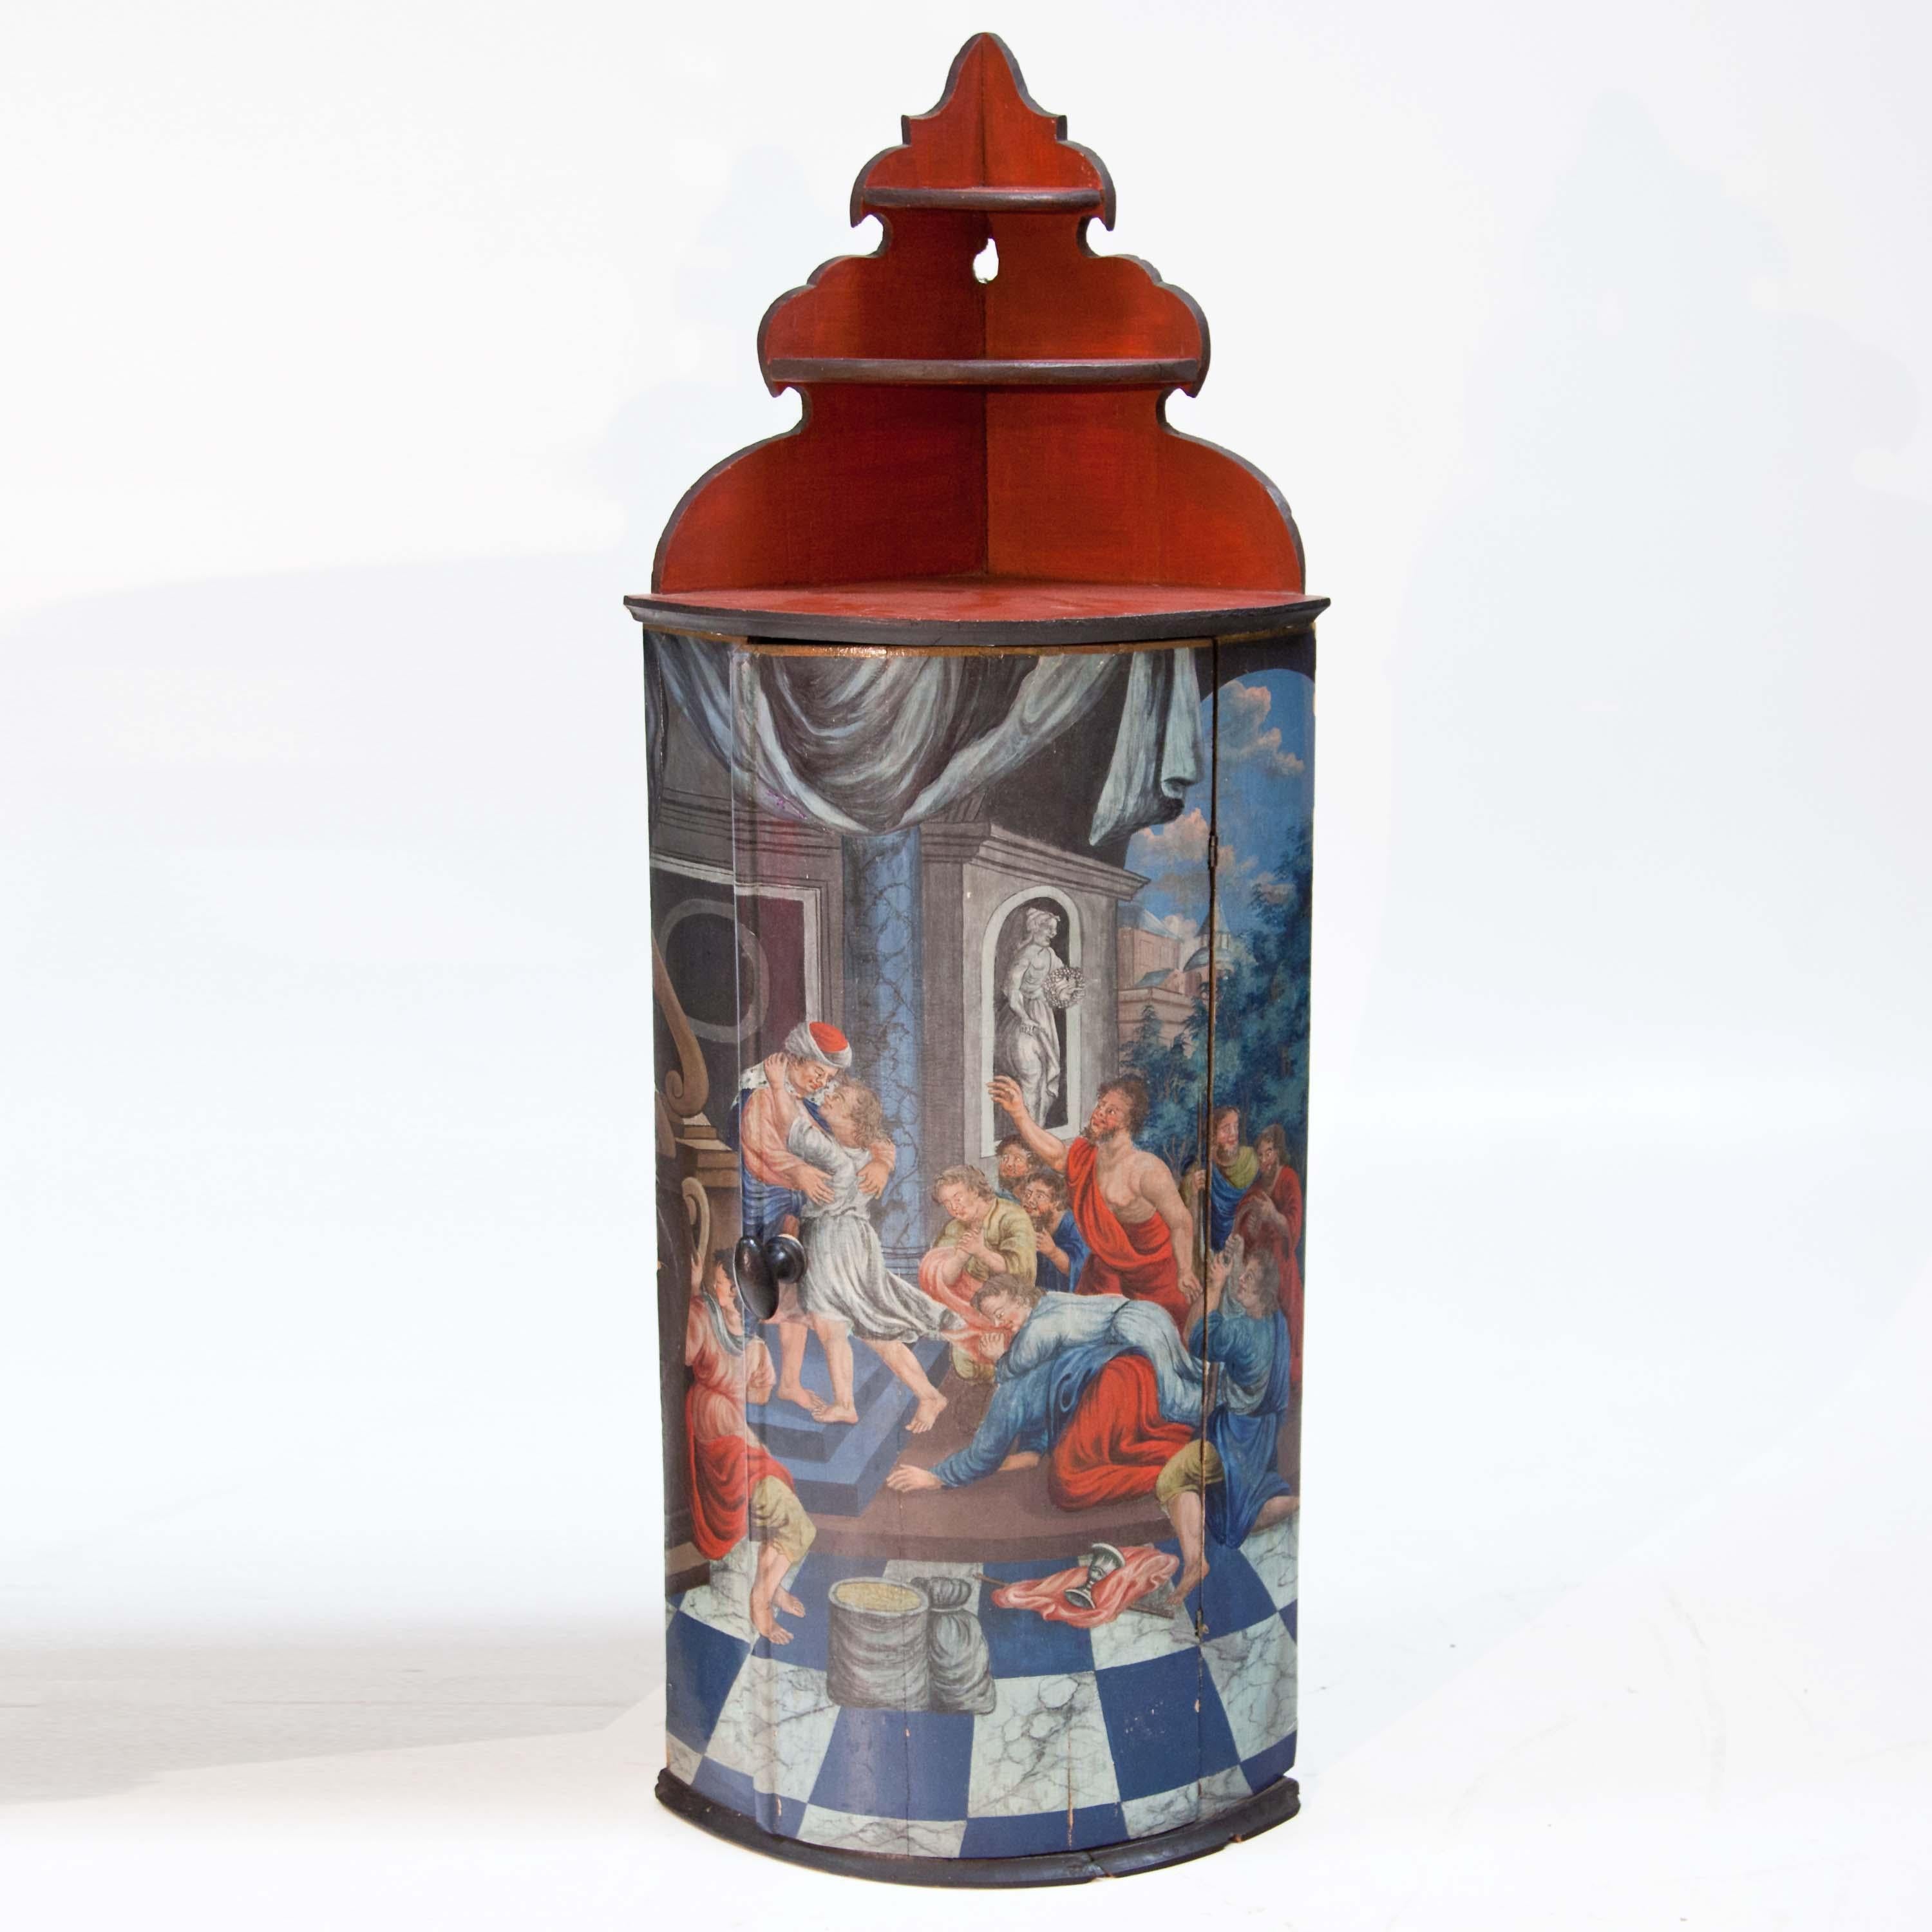 Small corner cupboard in Italian style with polychrome figural scene on the front. The segment-shaped body (side length 37 cm) is complemented by a red three-tier shelf with a cut-out back wall.